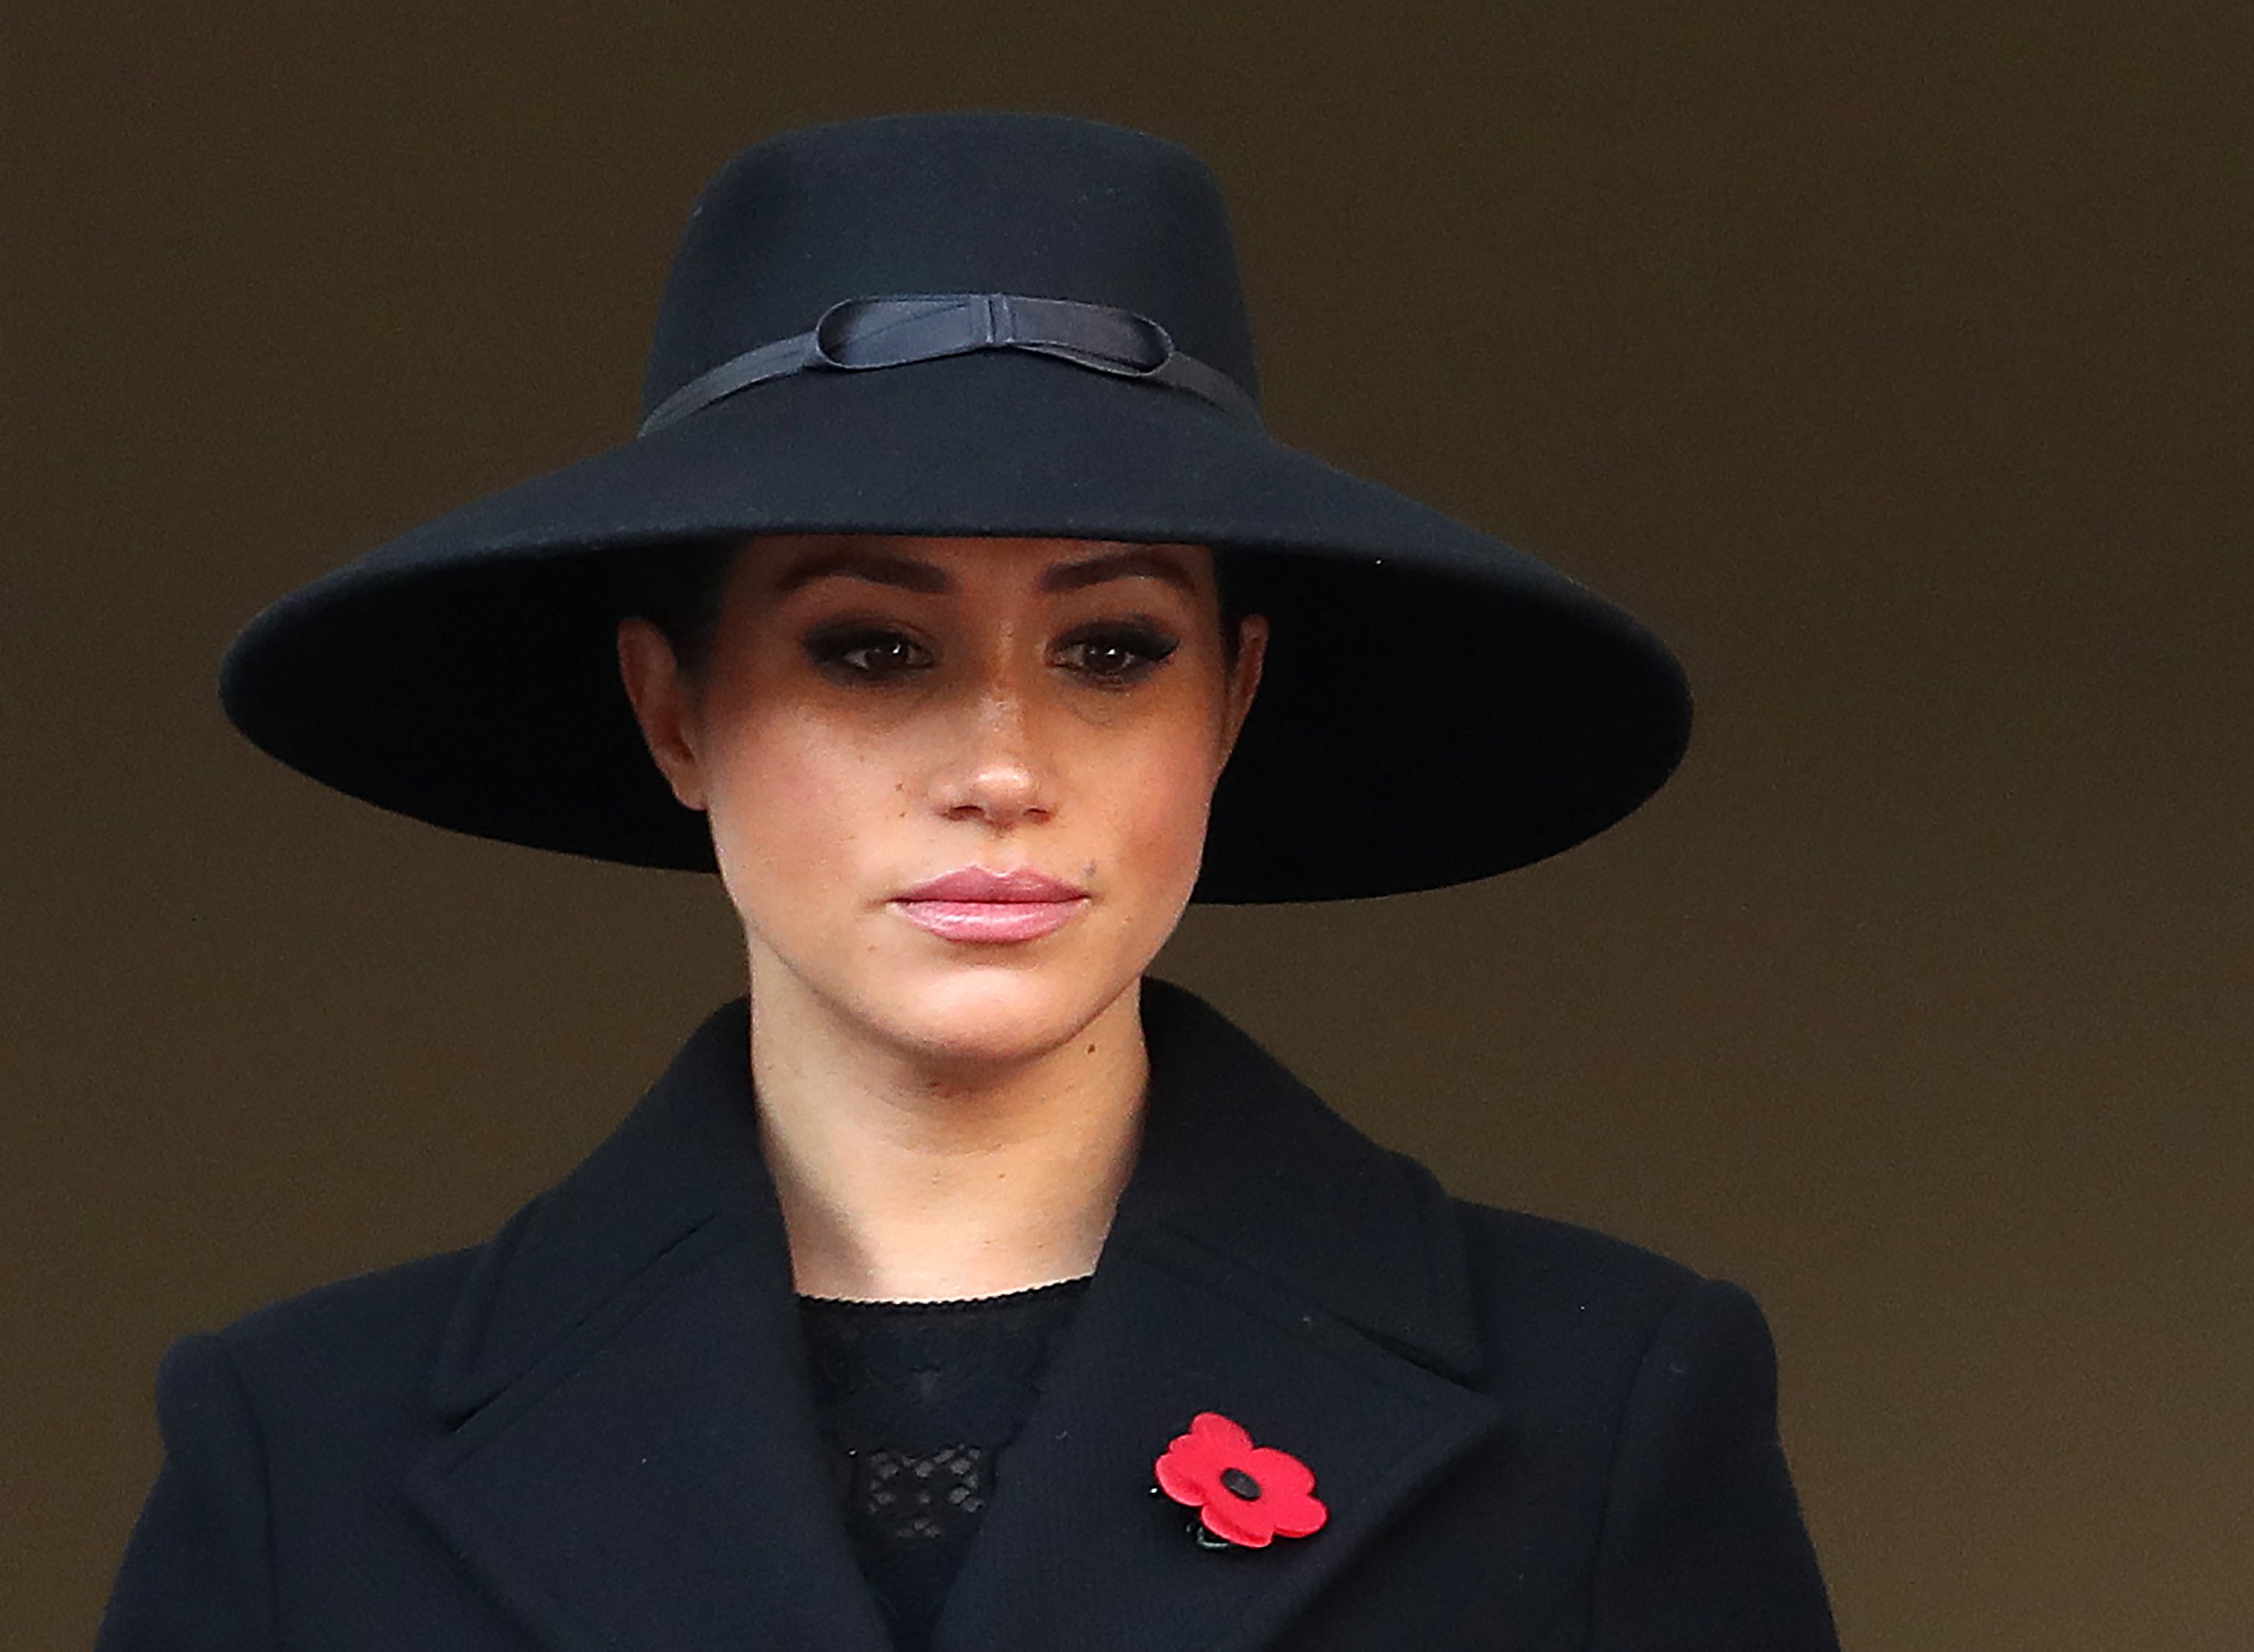 Meghan, Duchess of Sussex attends the annual Remembrance Sunday memorial at The Cenotaph on November 10, 2019, in London, England. | Source: Getty Images.